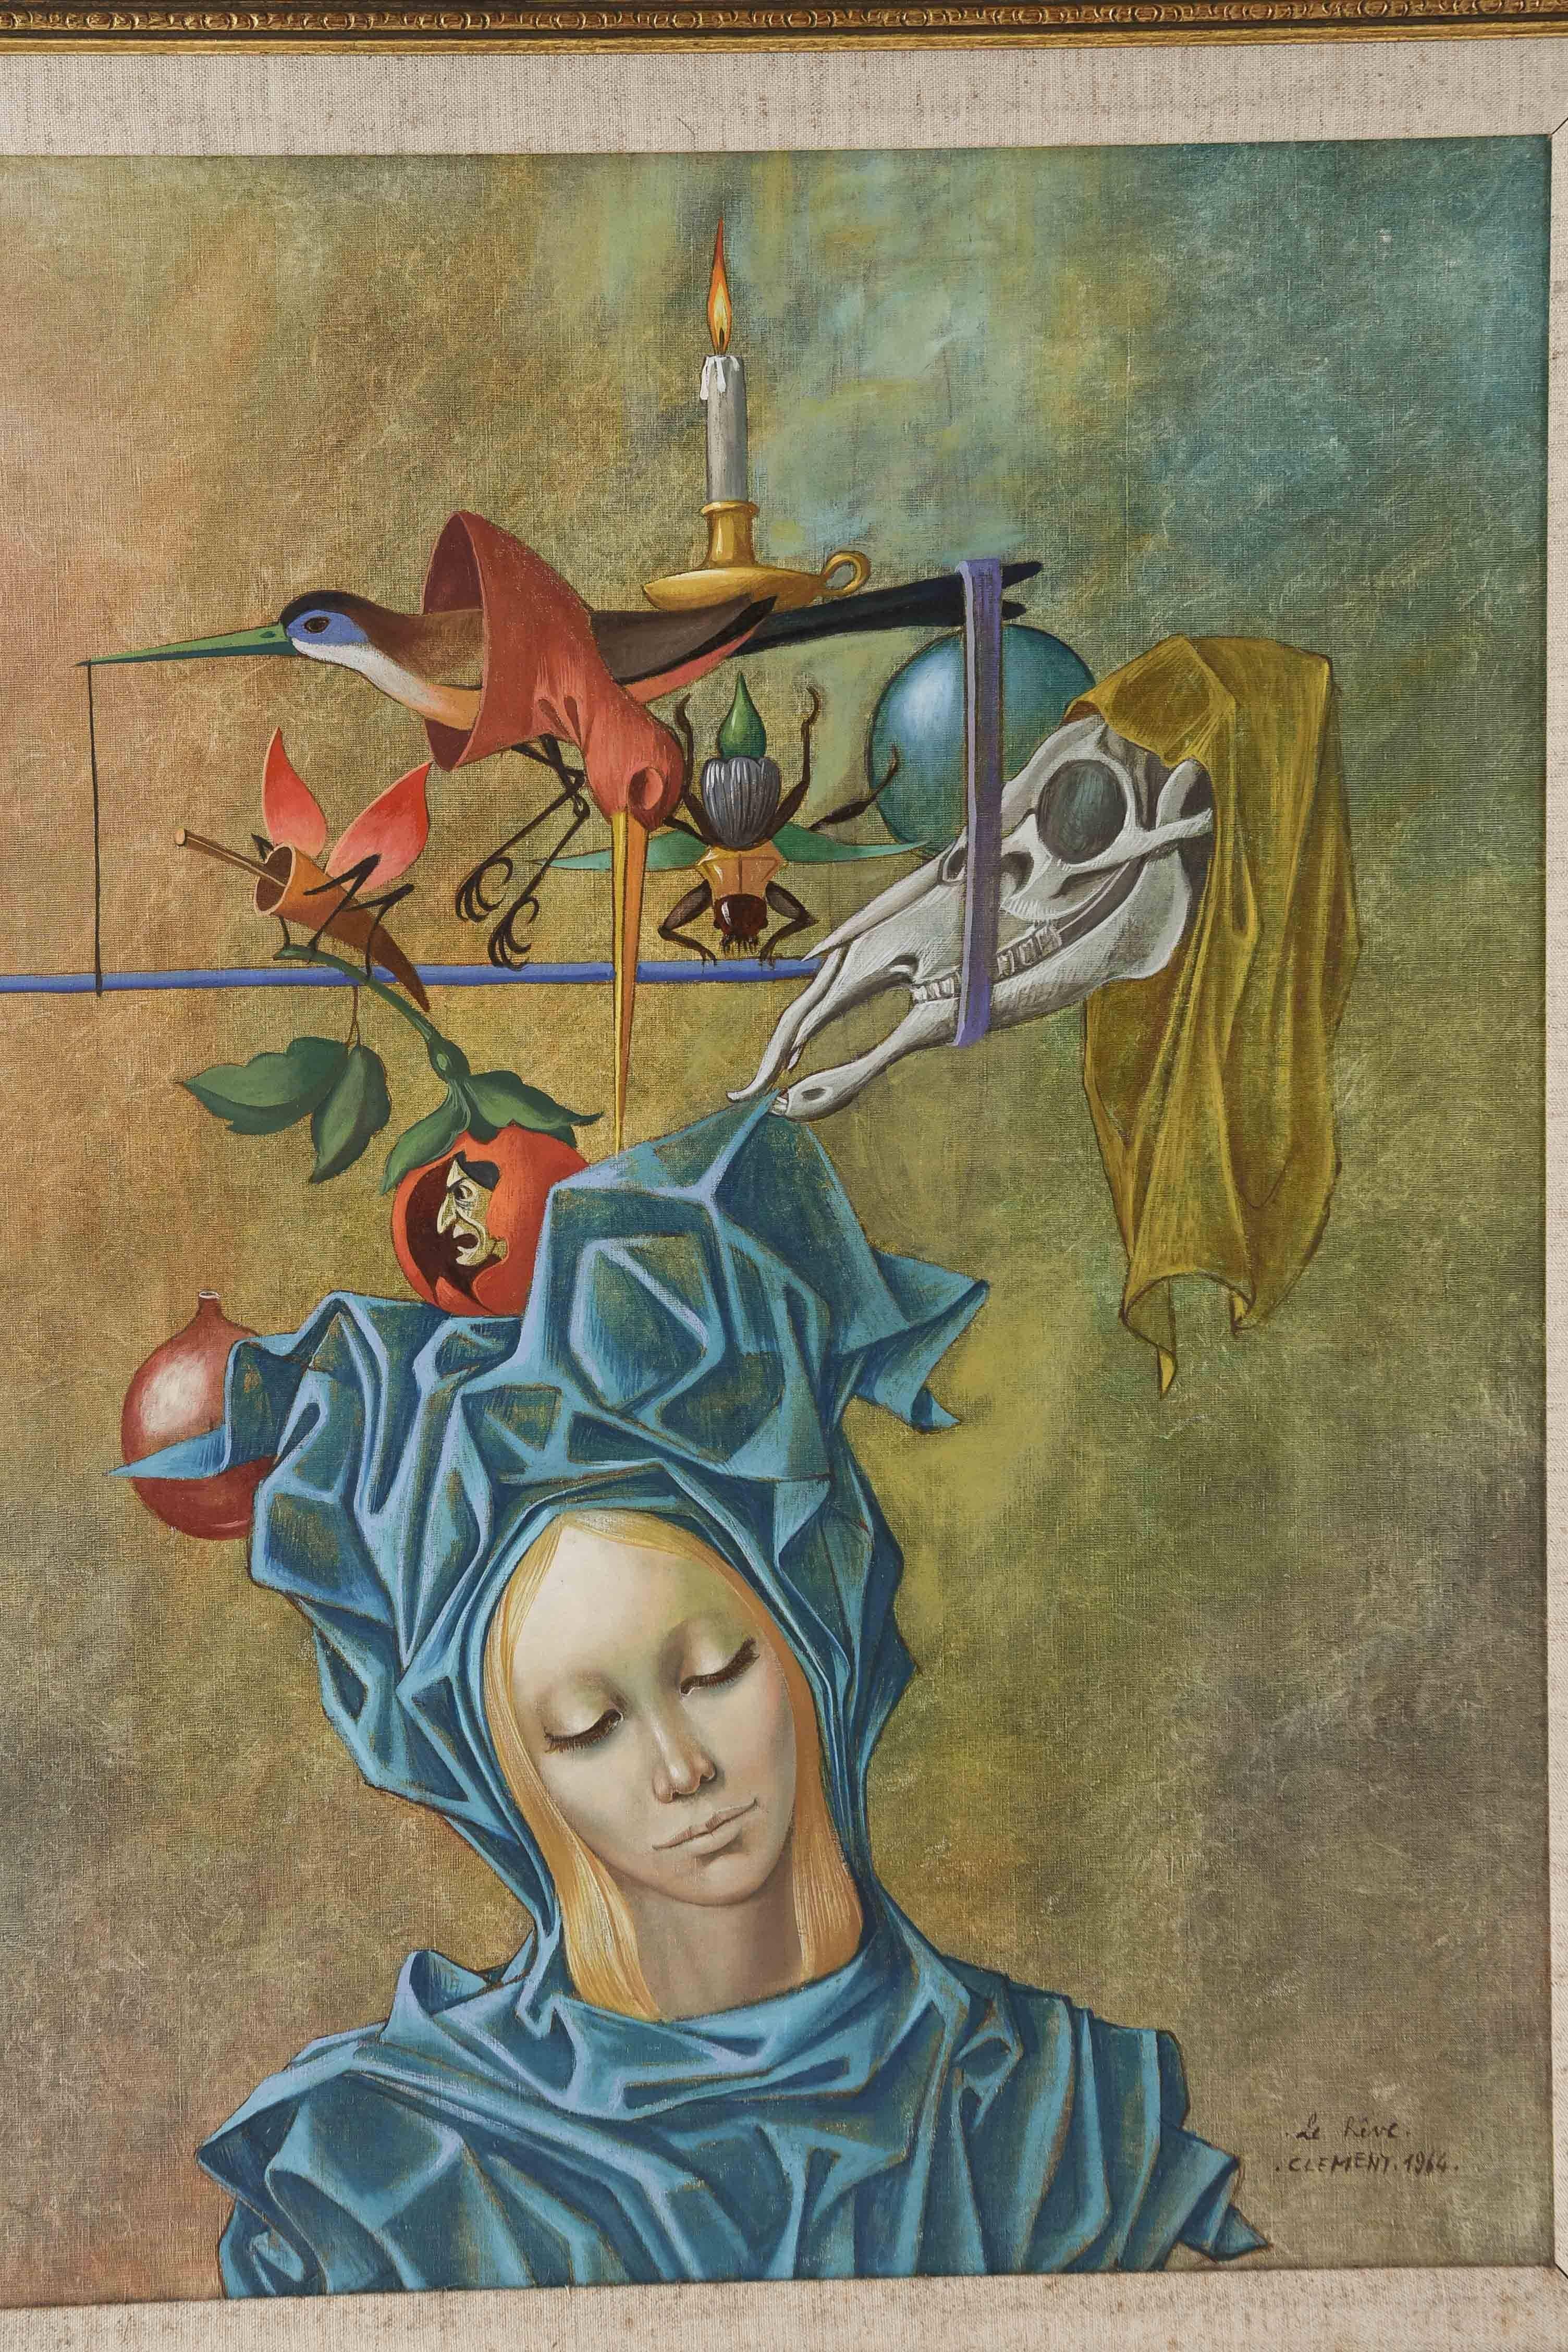 A surrealist painting by listed French artist Jean Pierre Clement depicting a portrait of a sleeping woman, covered by a geometric blue headdress and body cover. Above her hovers a covered skull, some insects, birds, a lit candle, an apple with a